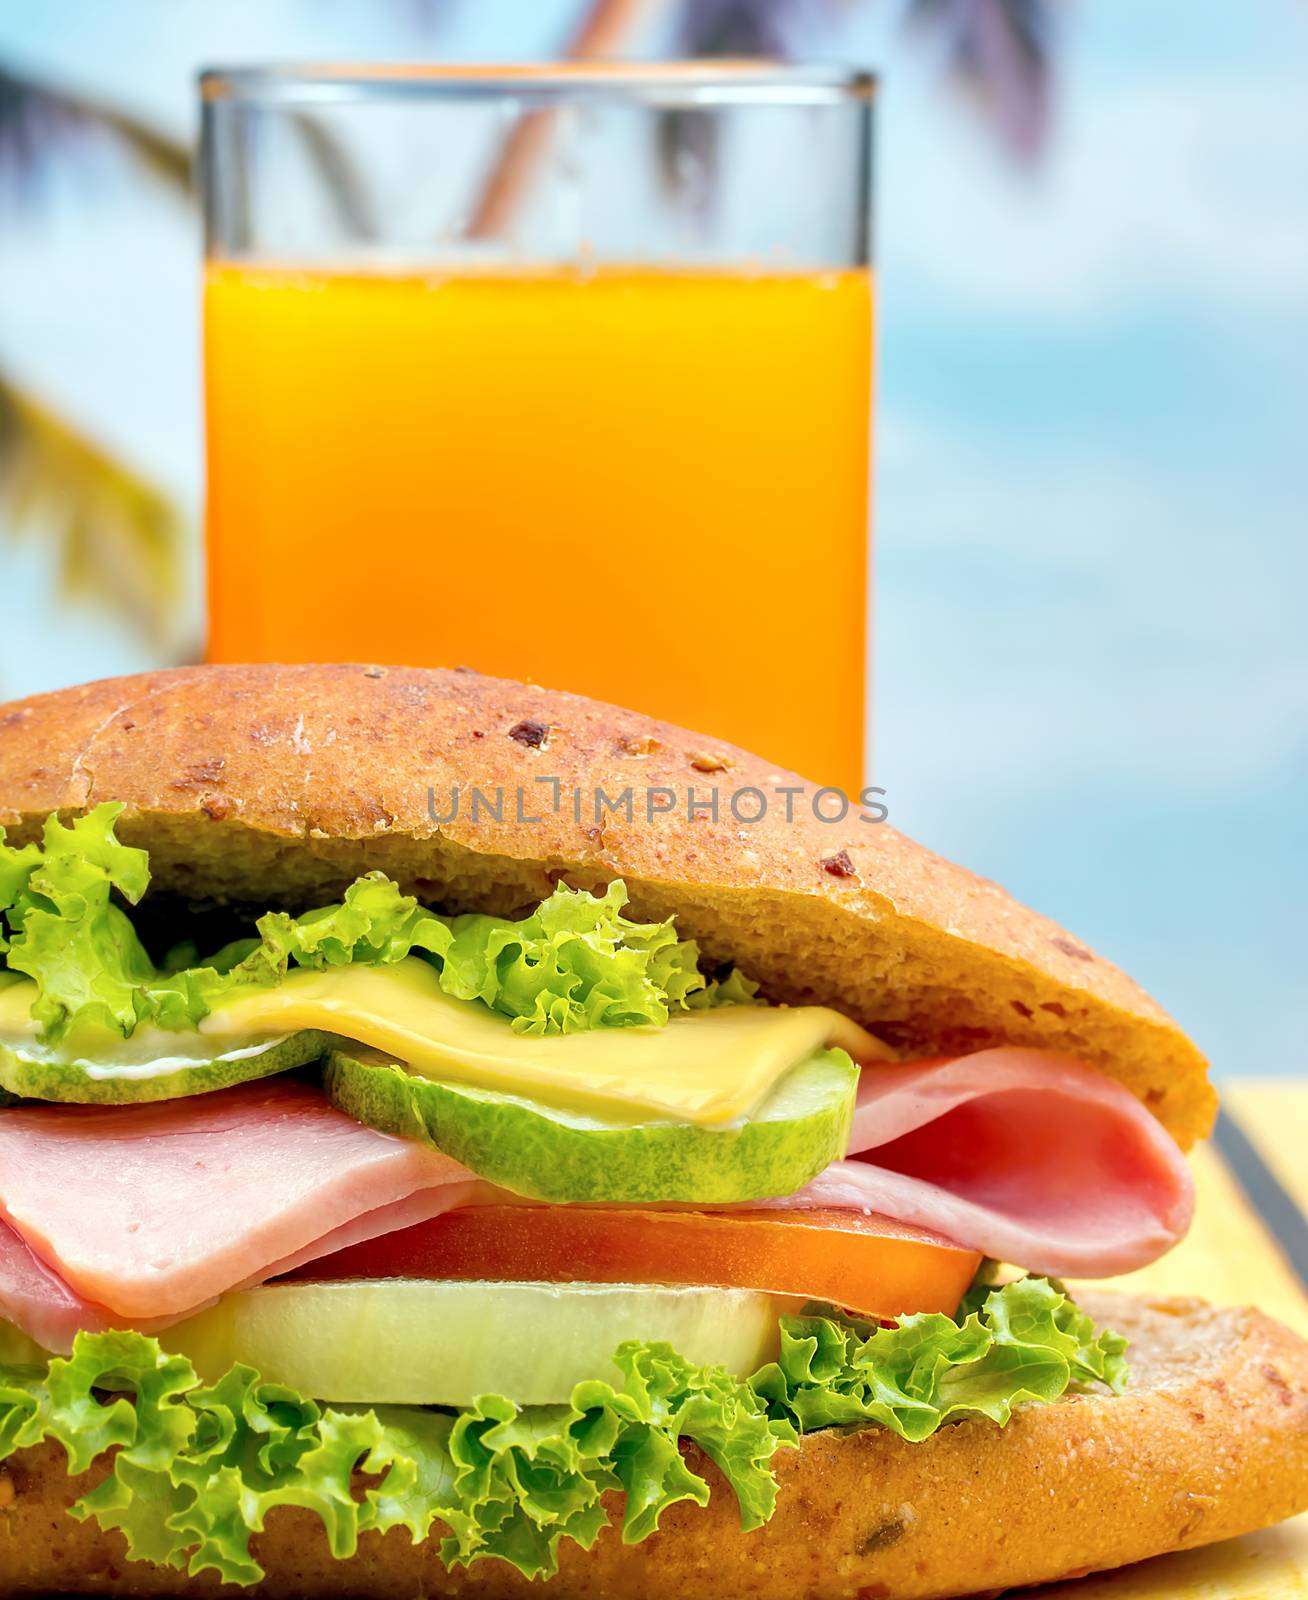 Juice And Sandwich Showing Orange Drink And Fruity